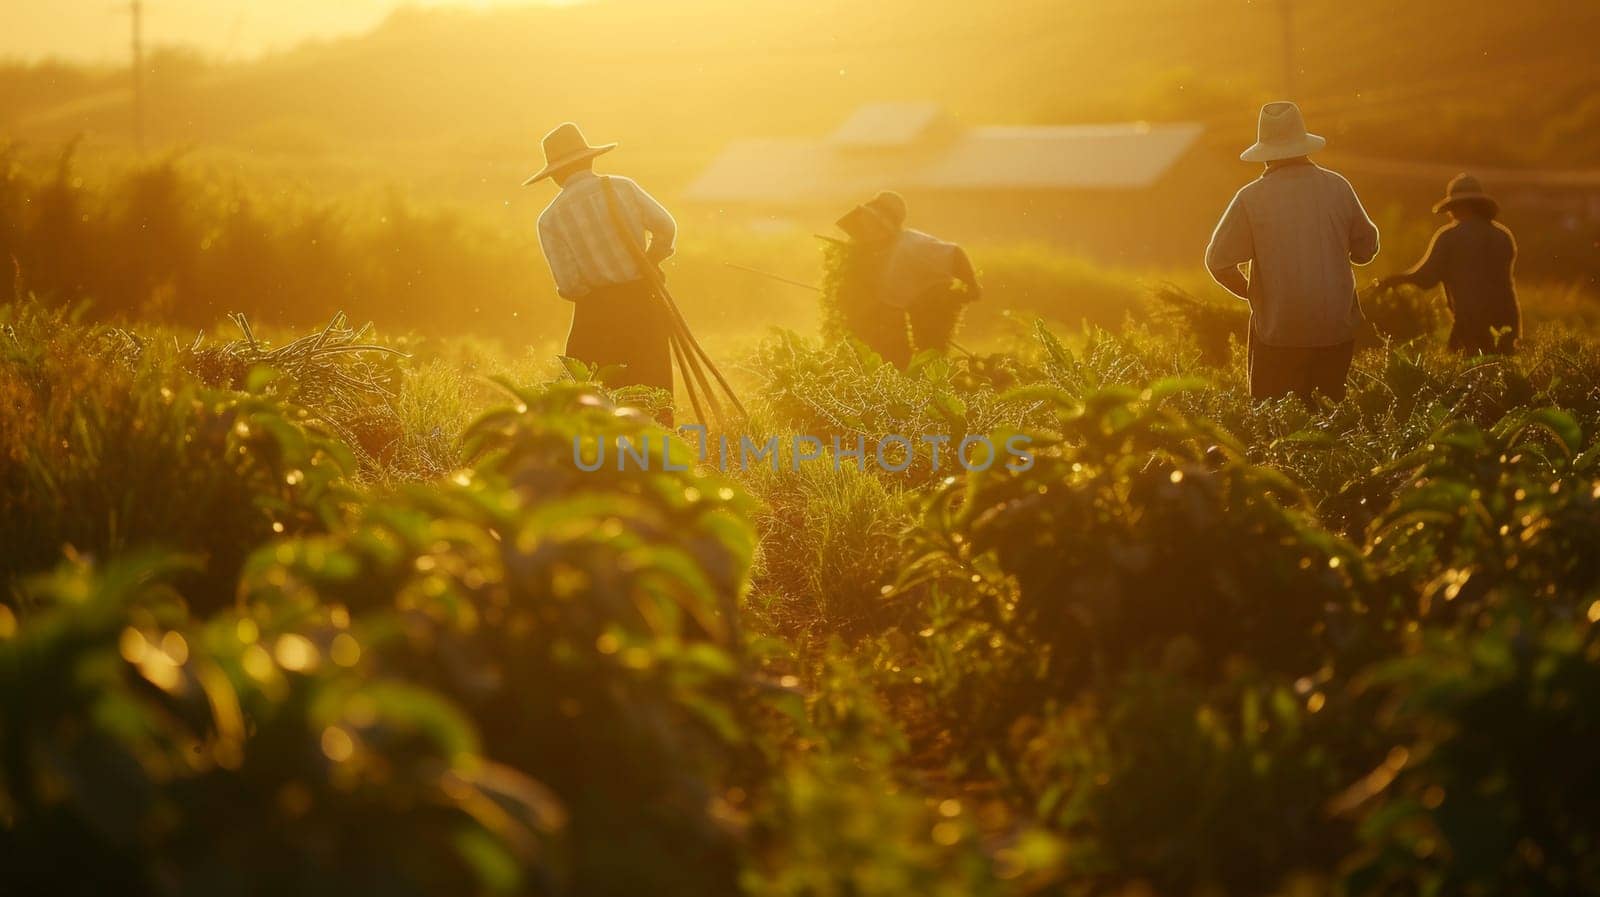 Group of farmers working in the fields during a golden sunset in rural landscape